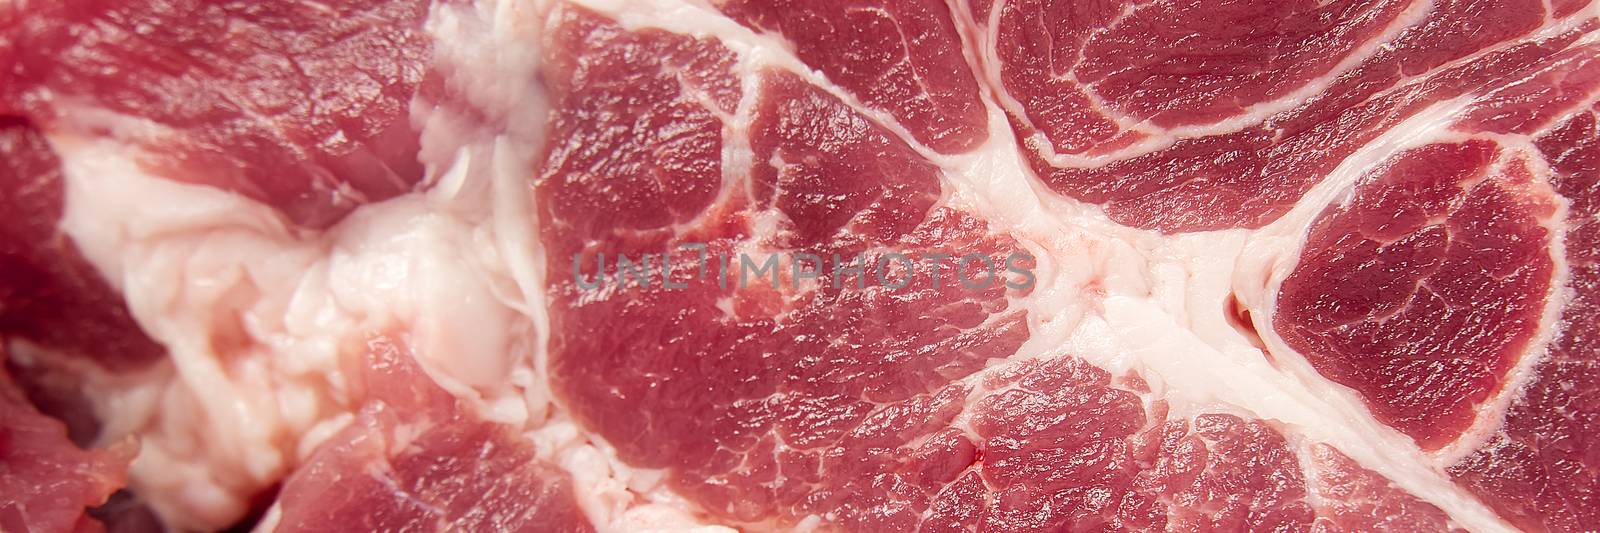 fresh raw pork meat texture, can be used as background. by PhotoTime